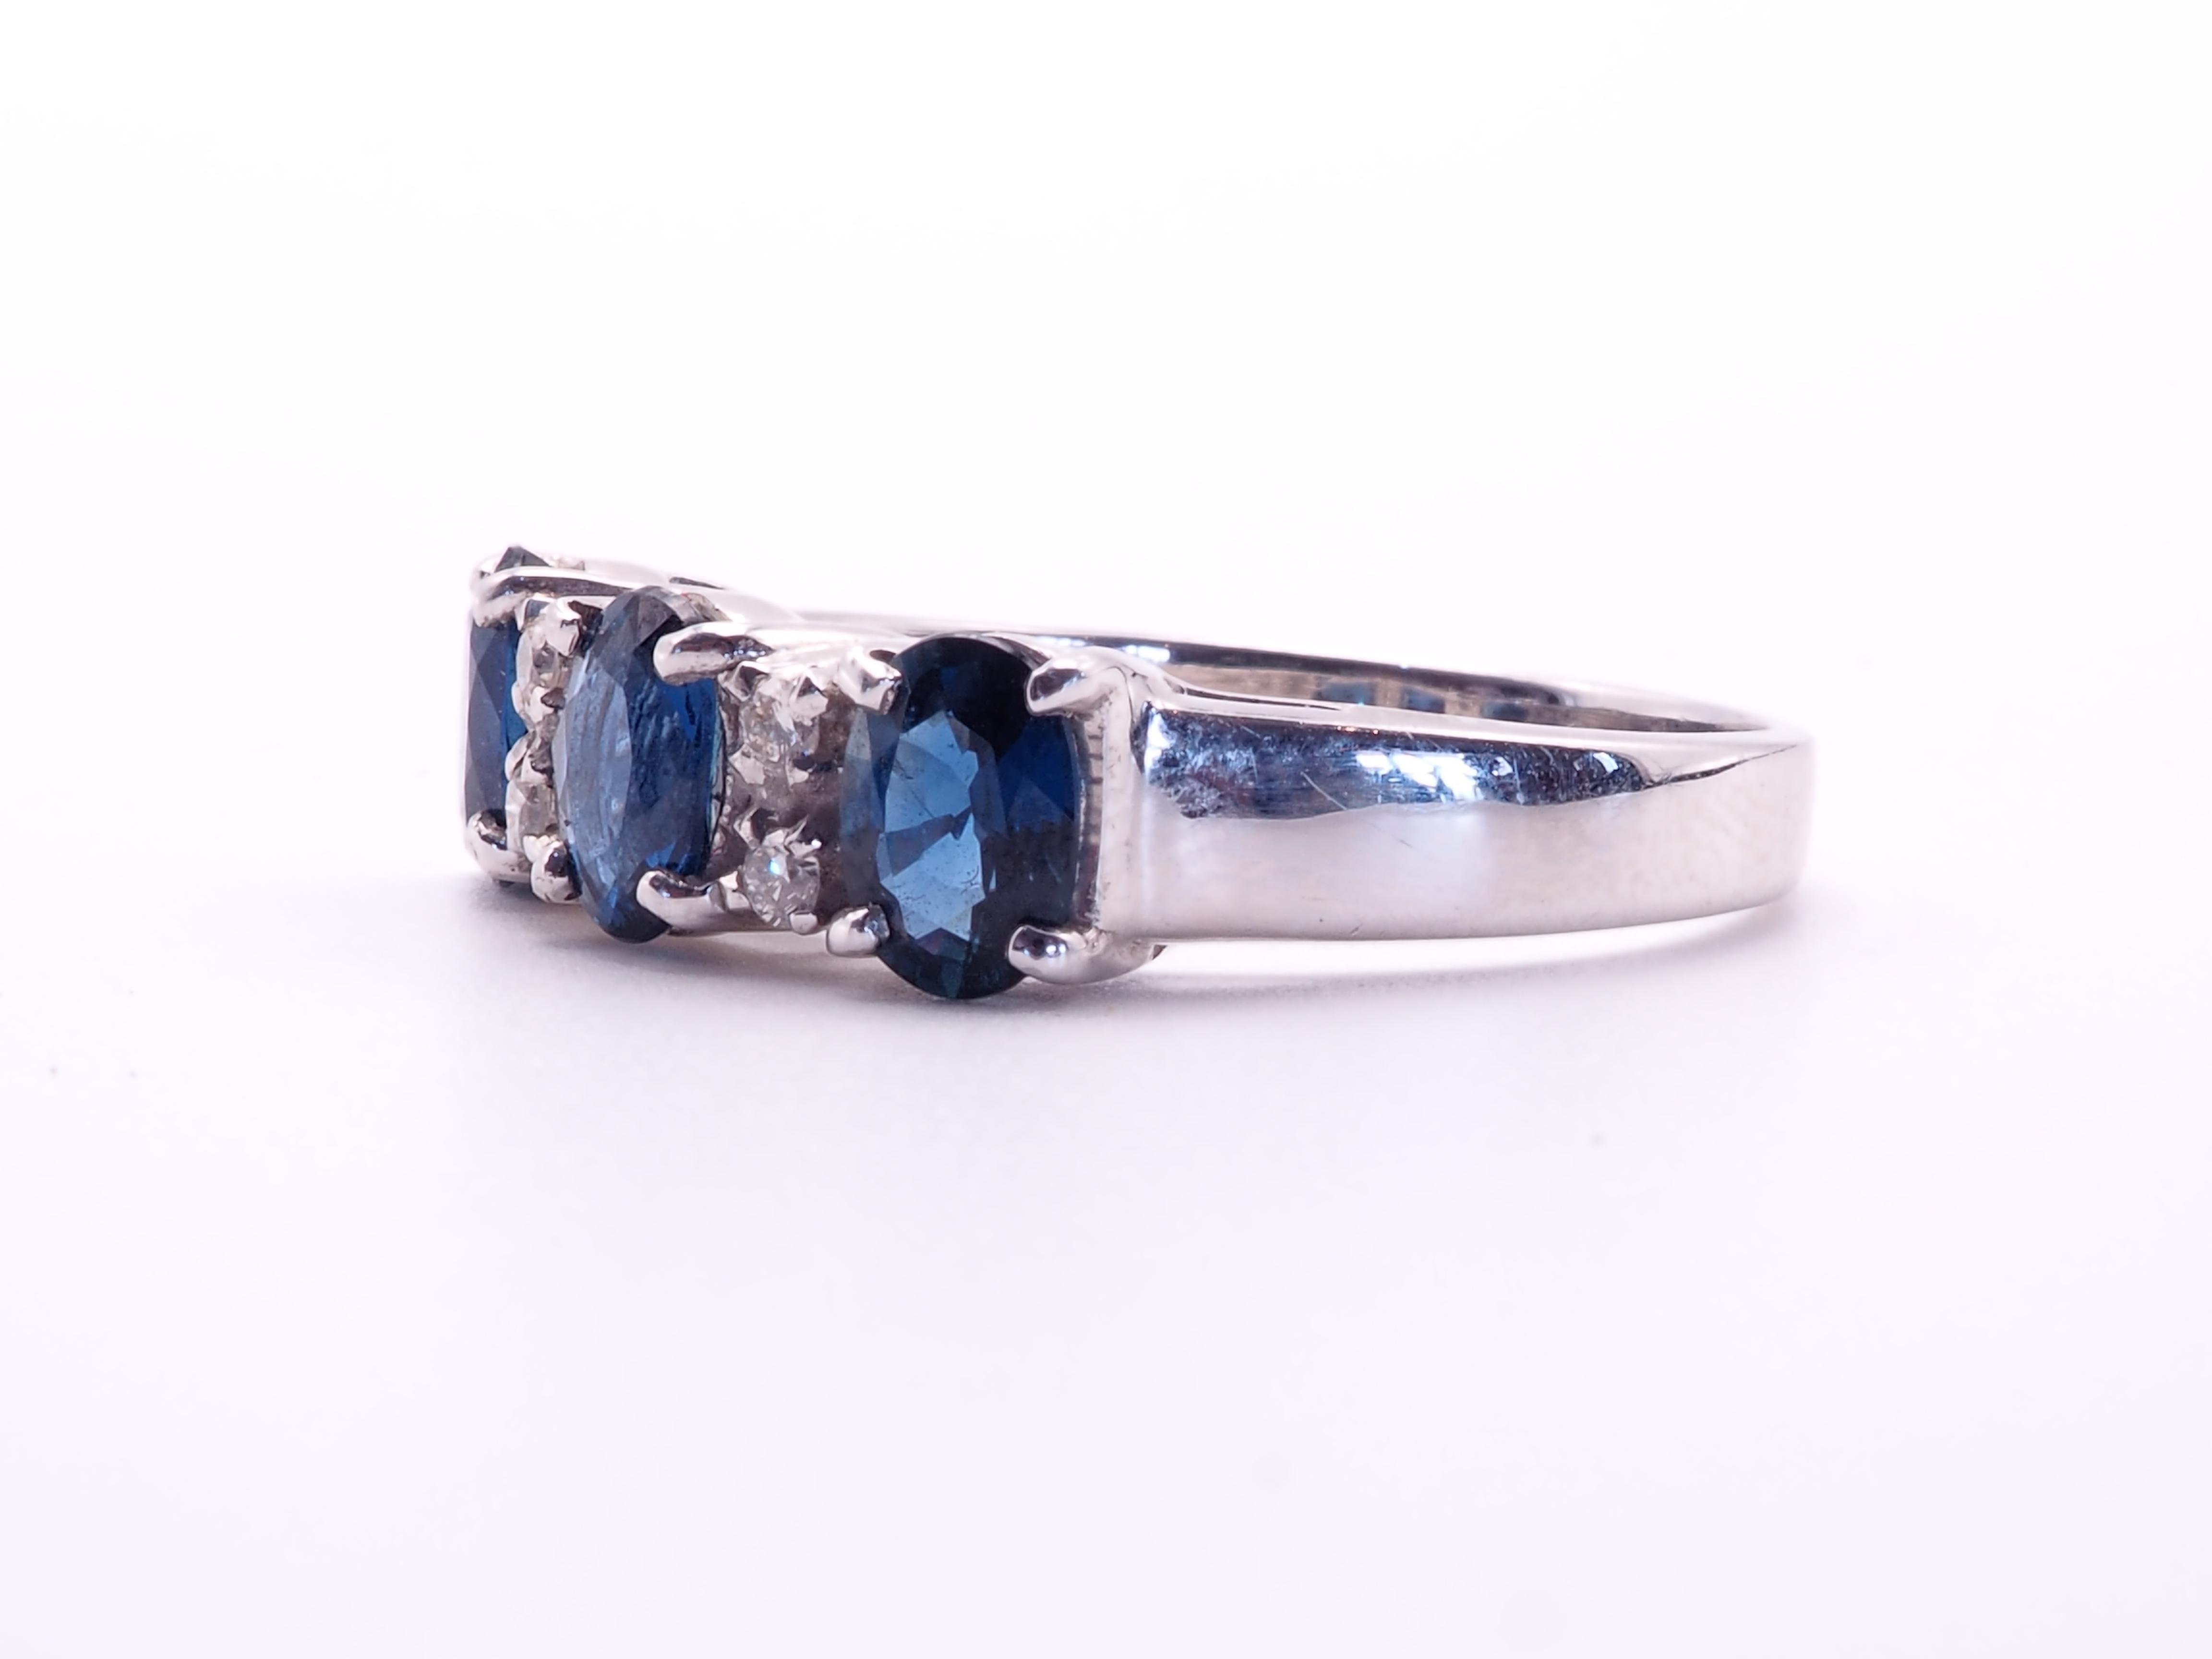 This quality and beautiful engagement piece is an 18K white gold fine quality oval blue sapphire and diamond ring. 3 fiery oval blue sapphires are set meticulously and all the same size with matching colors. There are 4 of round cut diamonds which